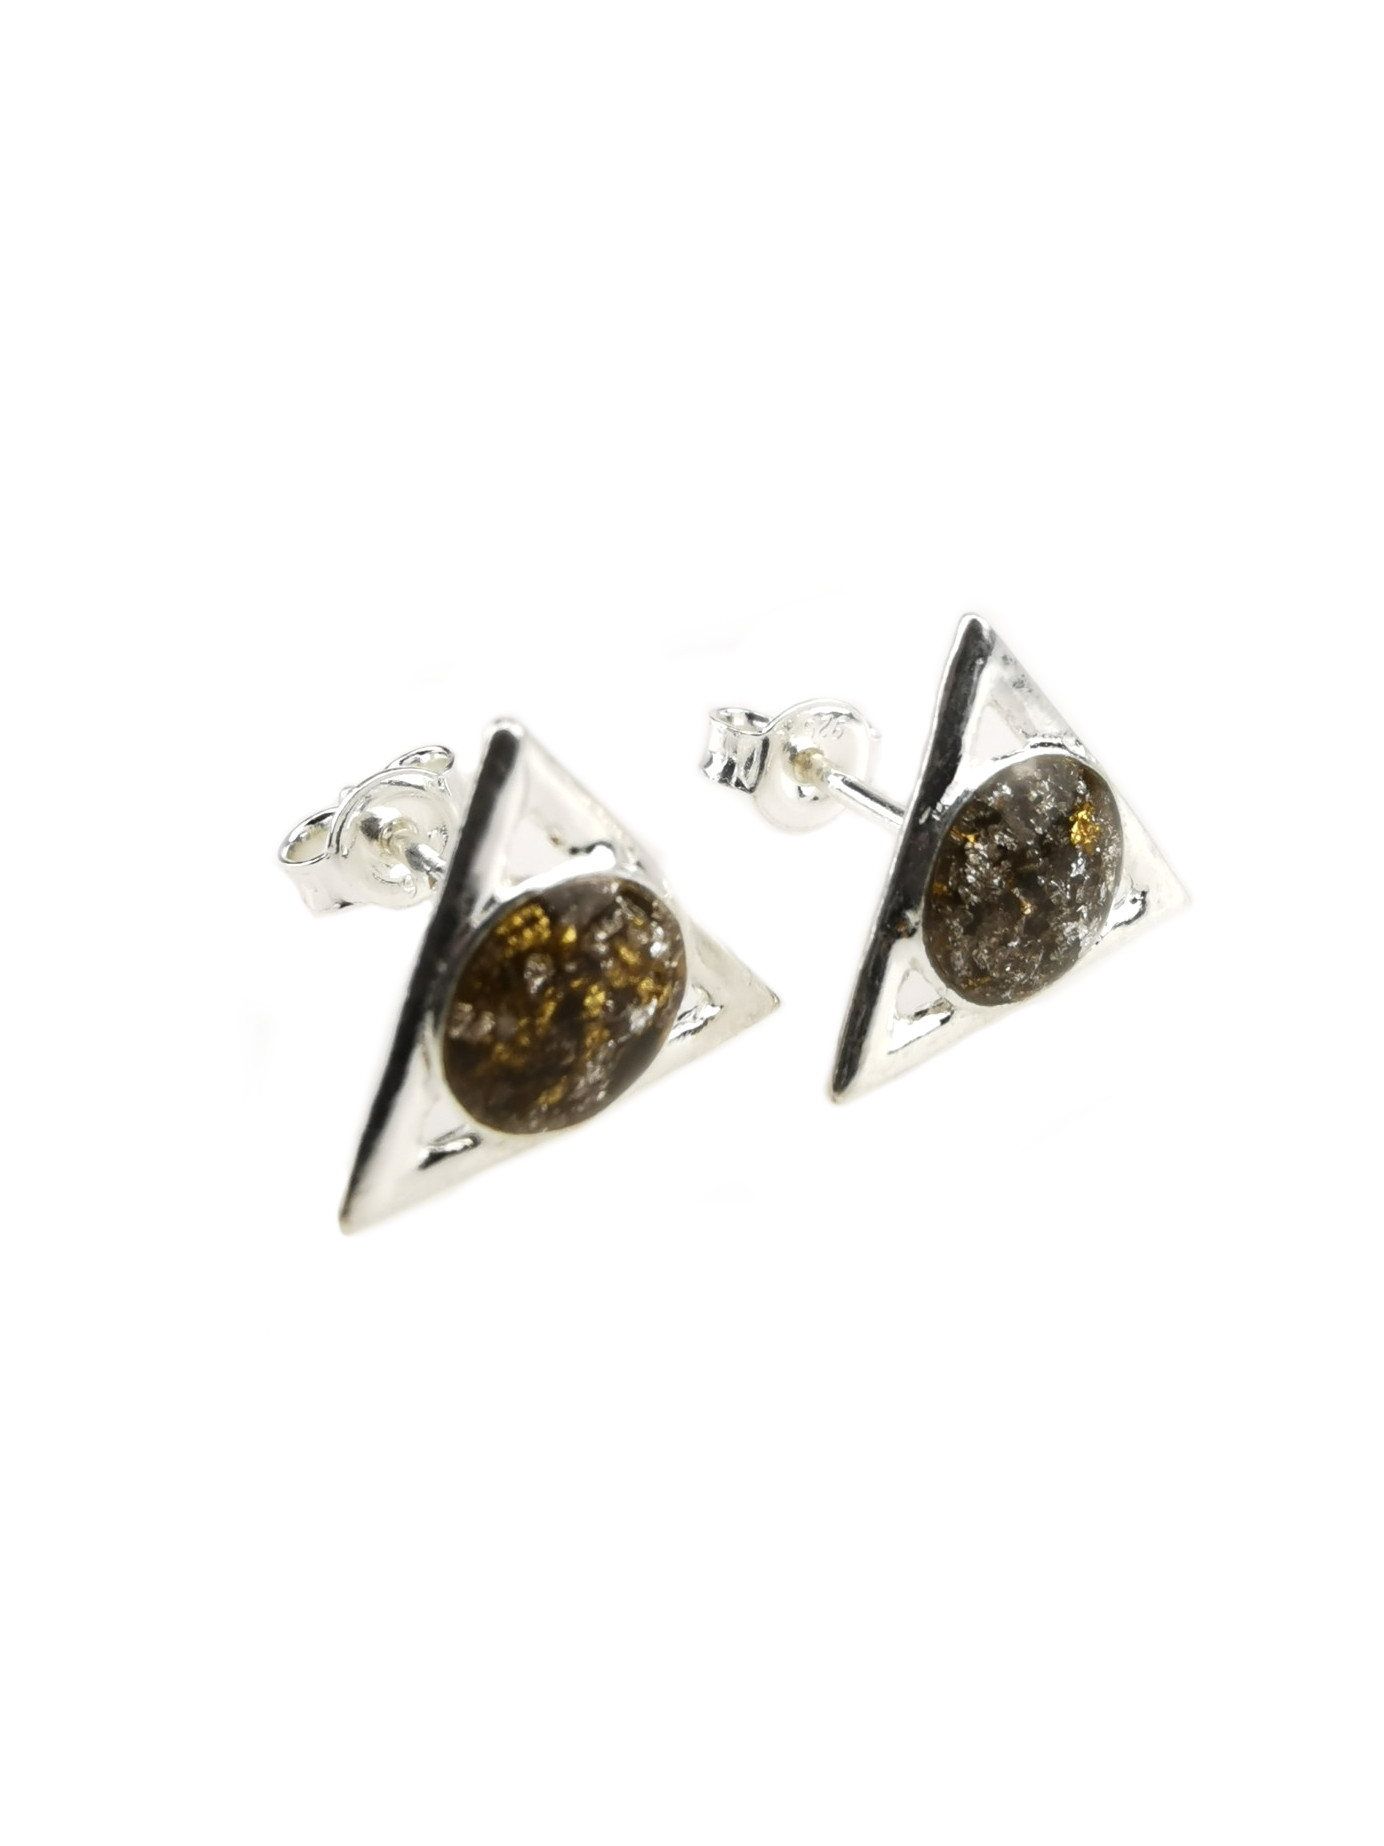 Grey Triangle Orgone Crystal Earrings by OrgoneVibes